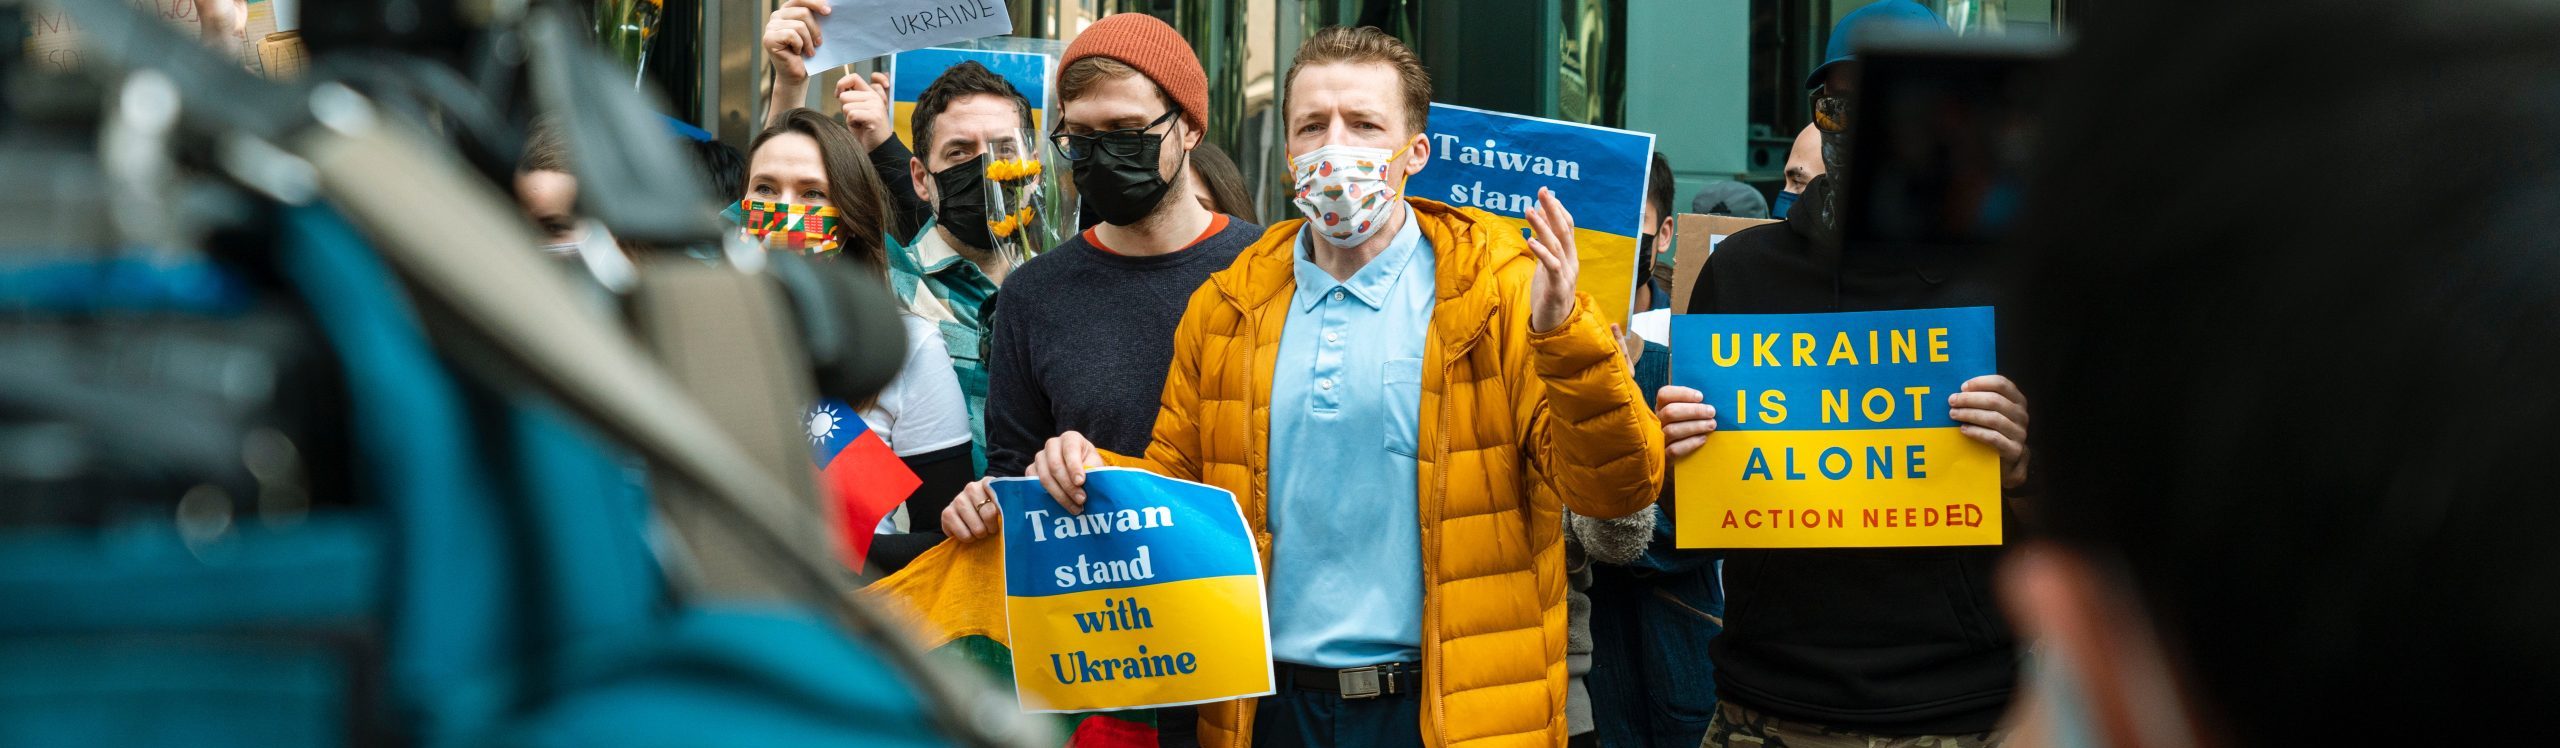 Photo by Jimmy Liao: https://www.pexels.com/photo/people-in-the-streets-of-taiwan-showing-support-for-ukraine-11302466/